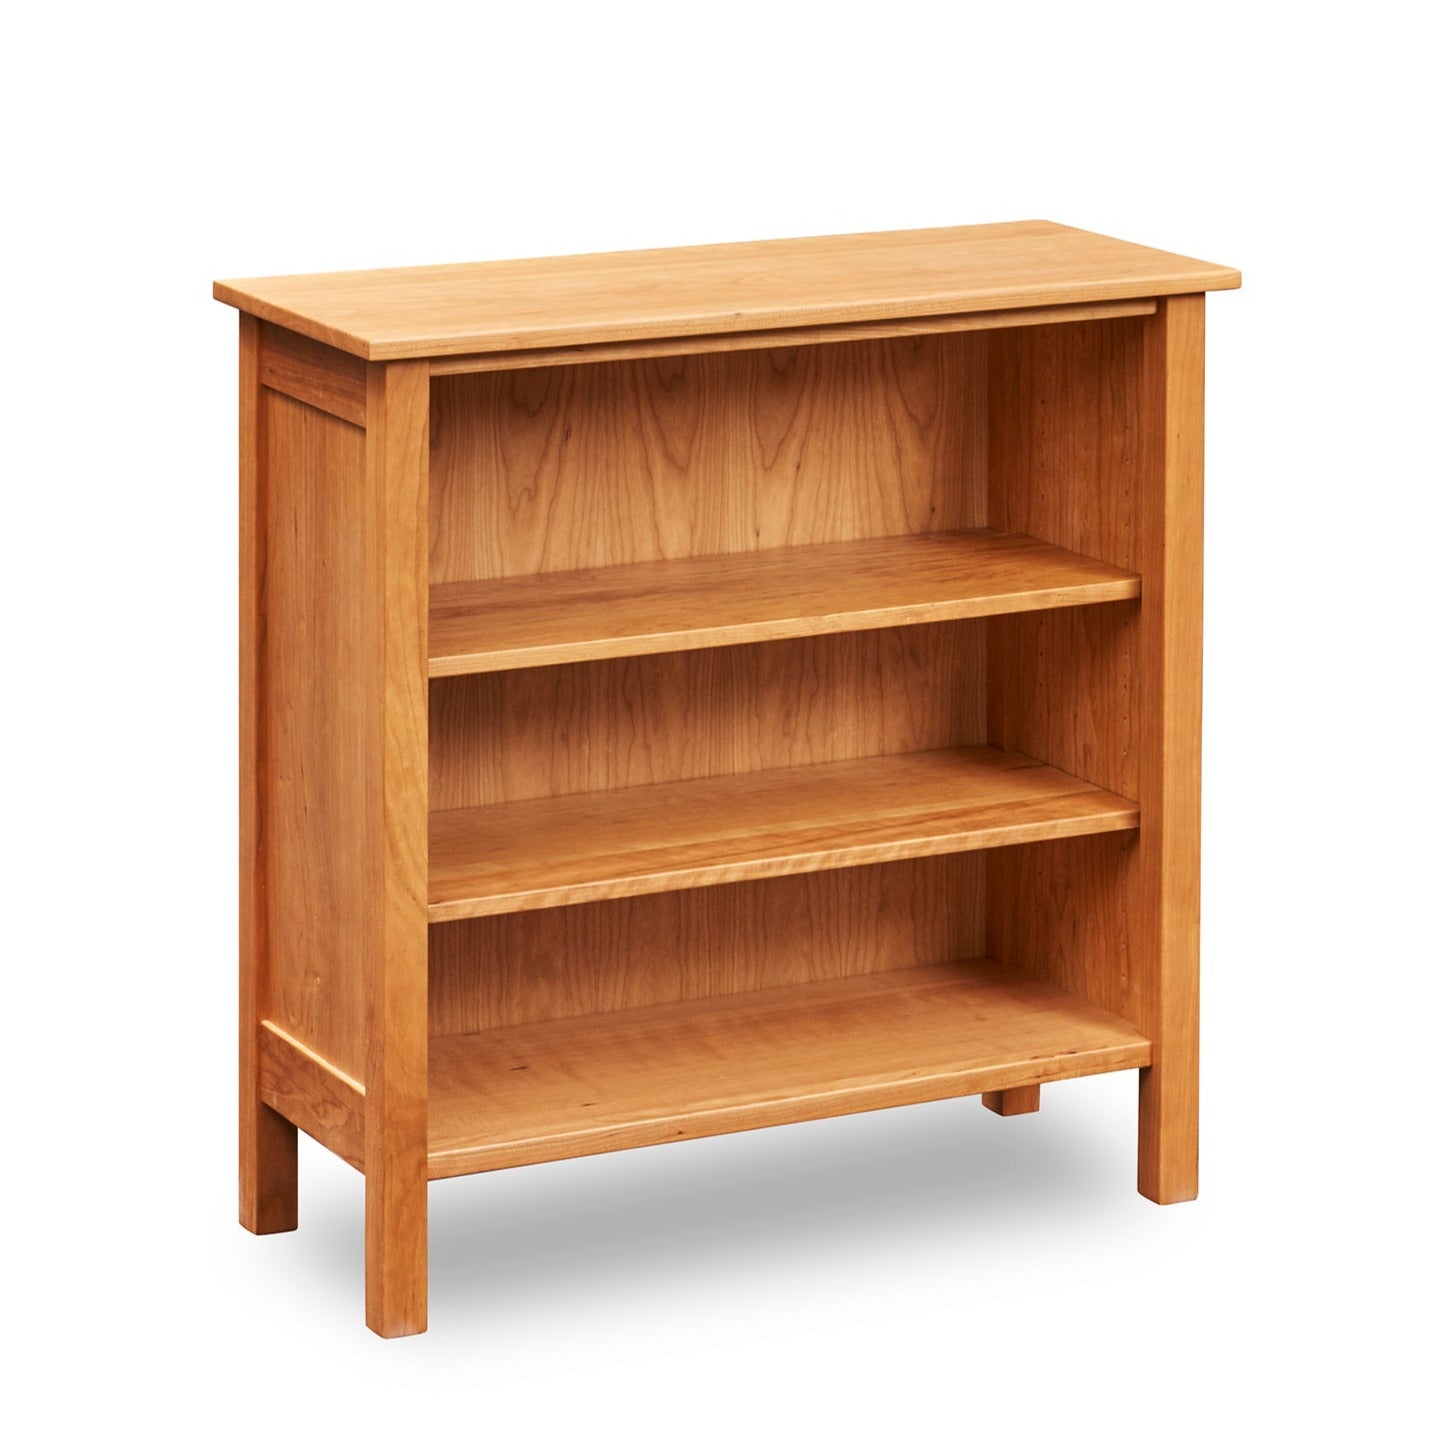 Three foot Shaker inspired solid cherry wood bookcase with three shelves, from Maine's Chilton Furniture